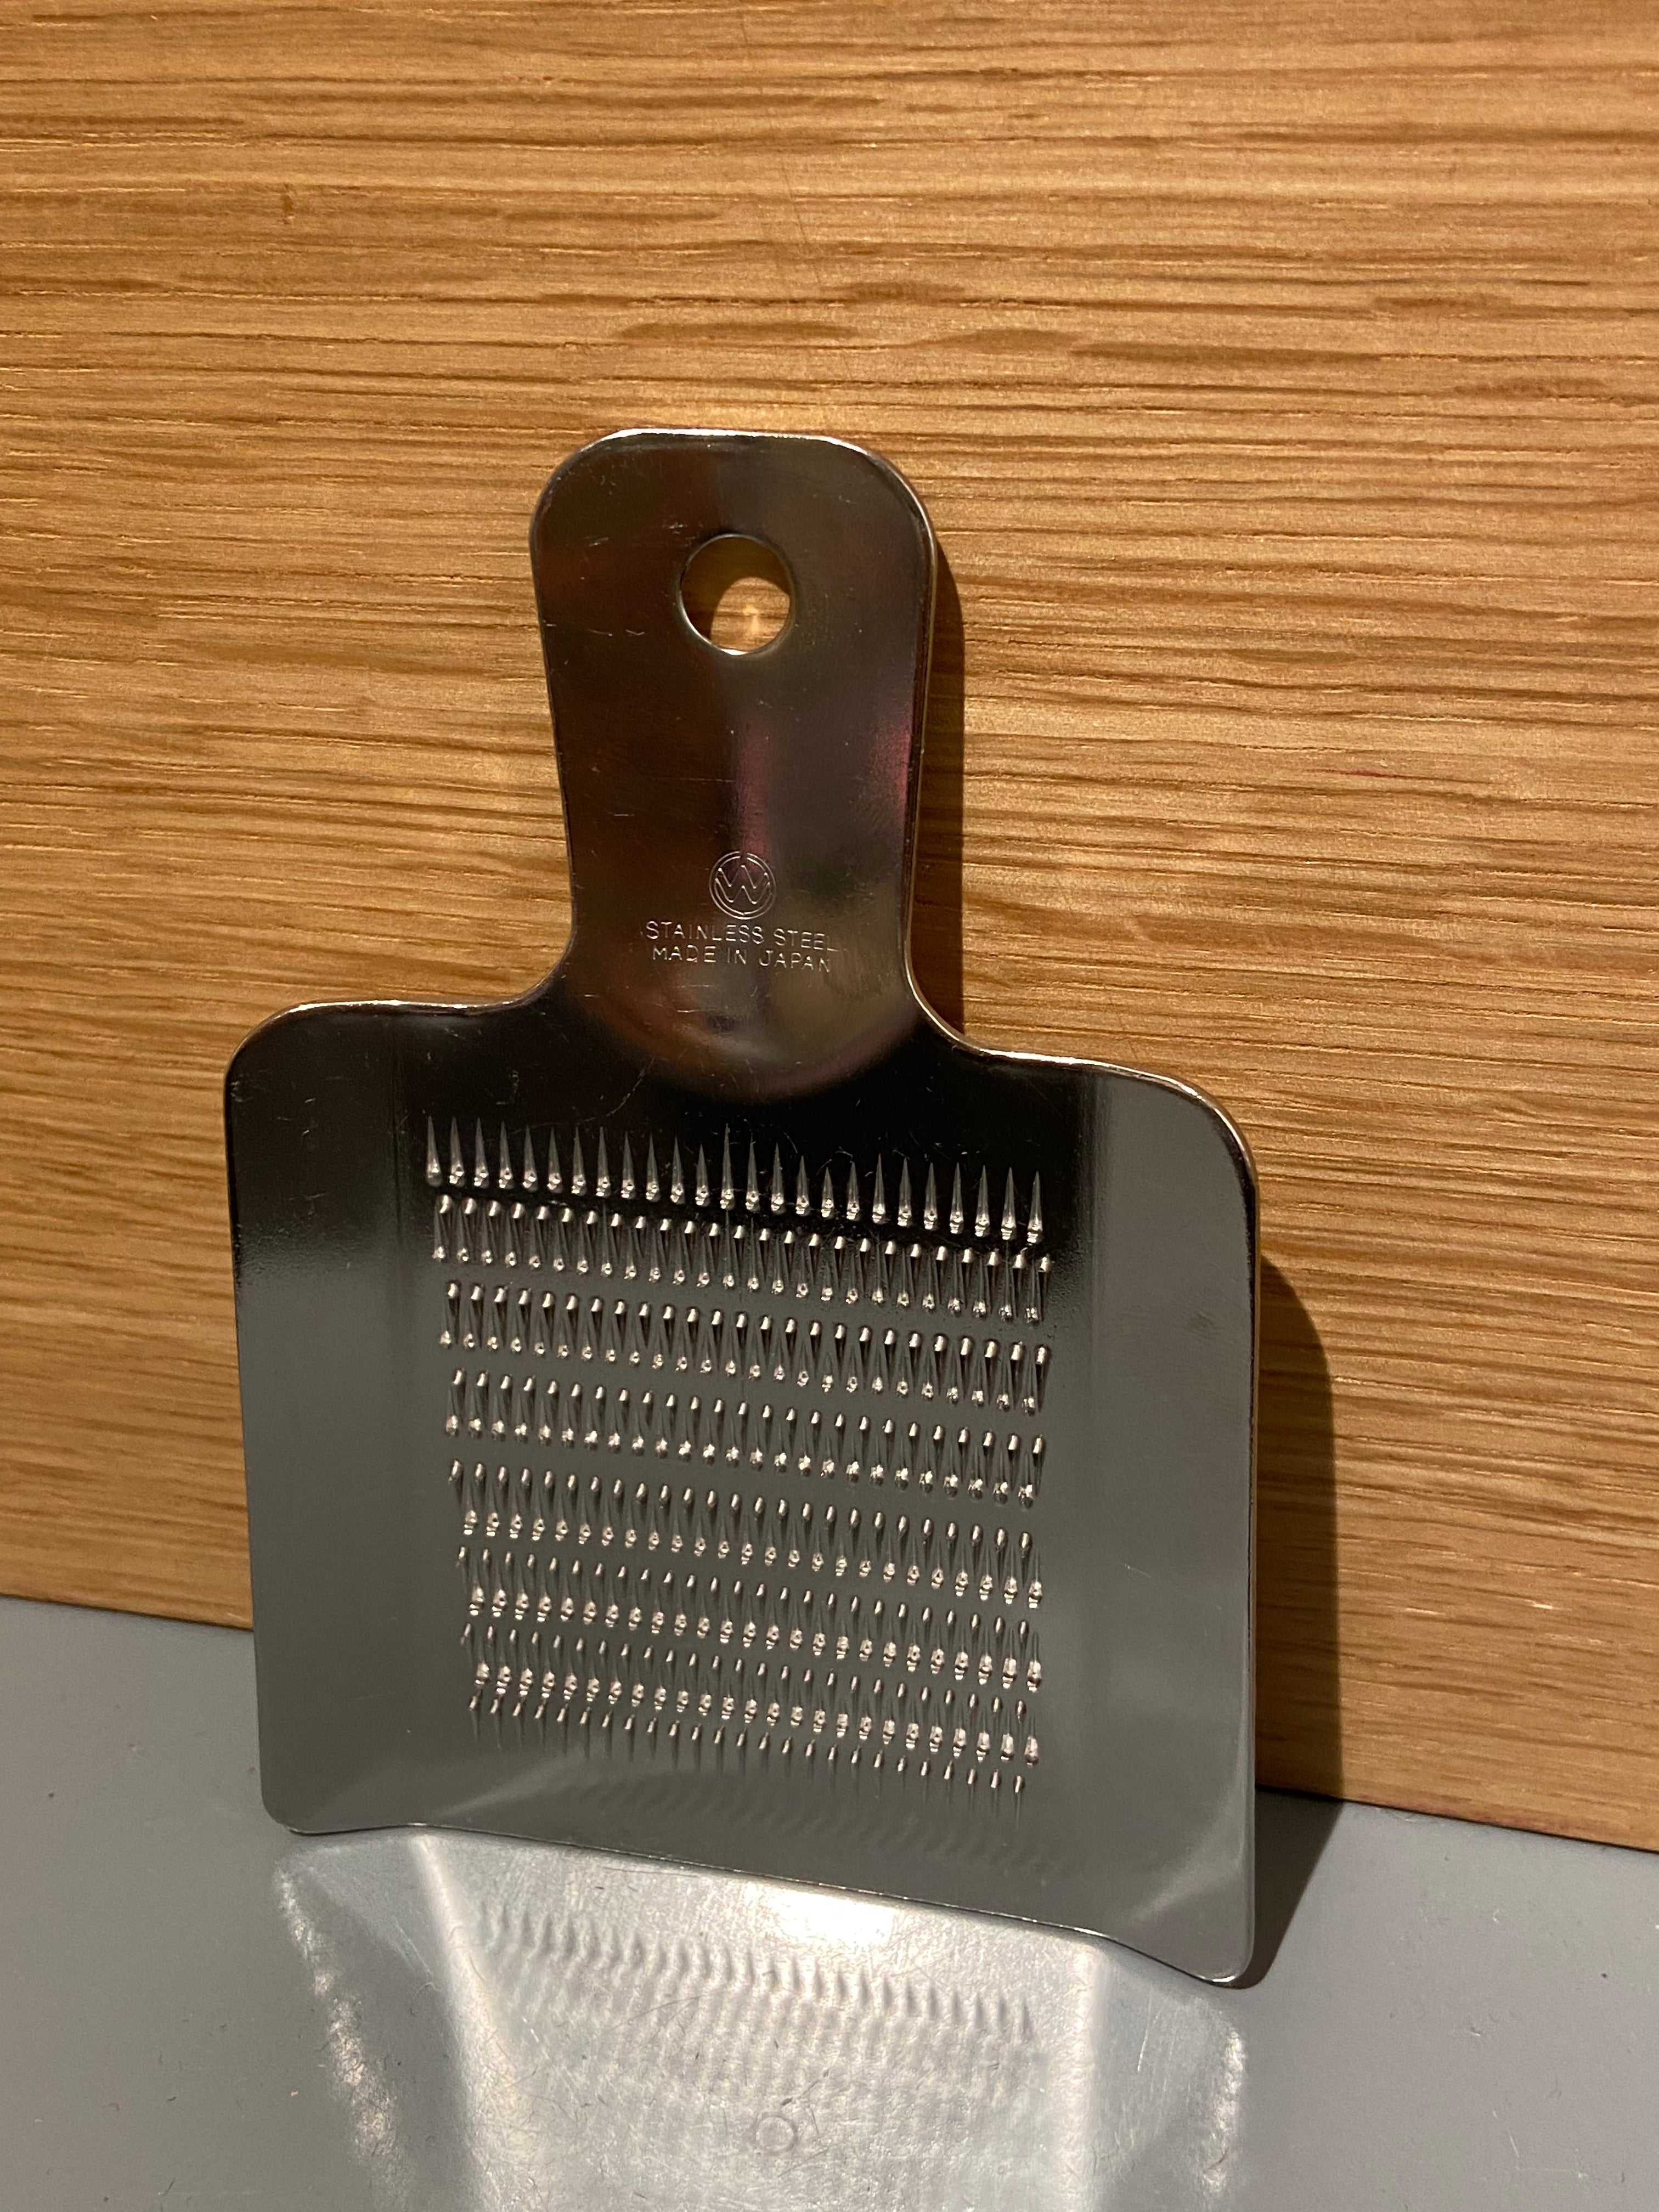 Japanese grater, large